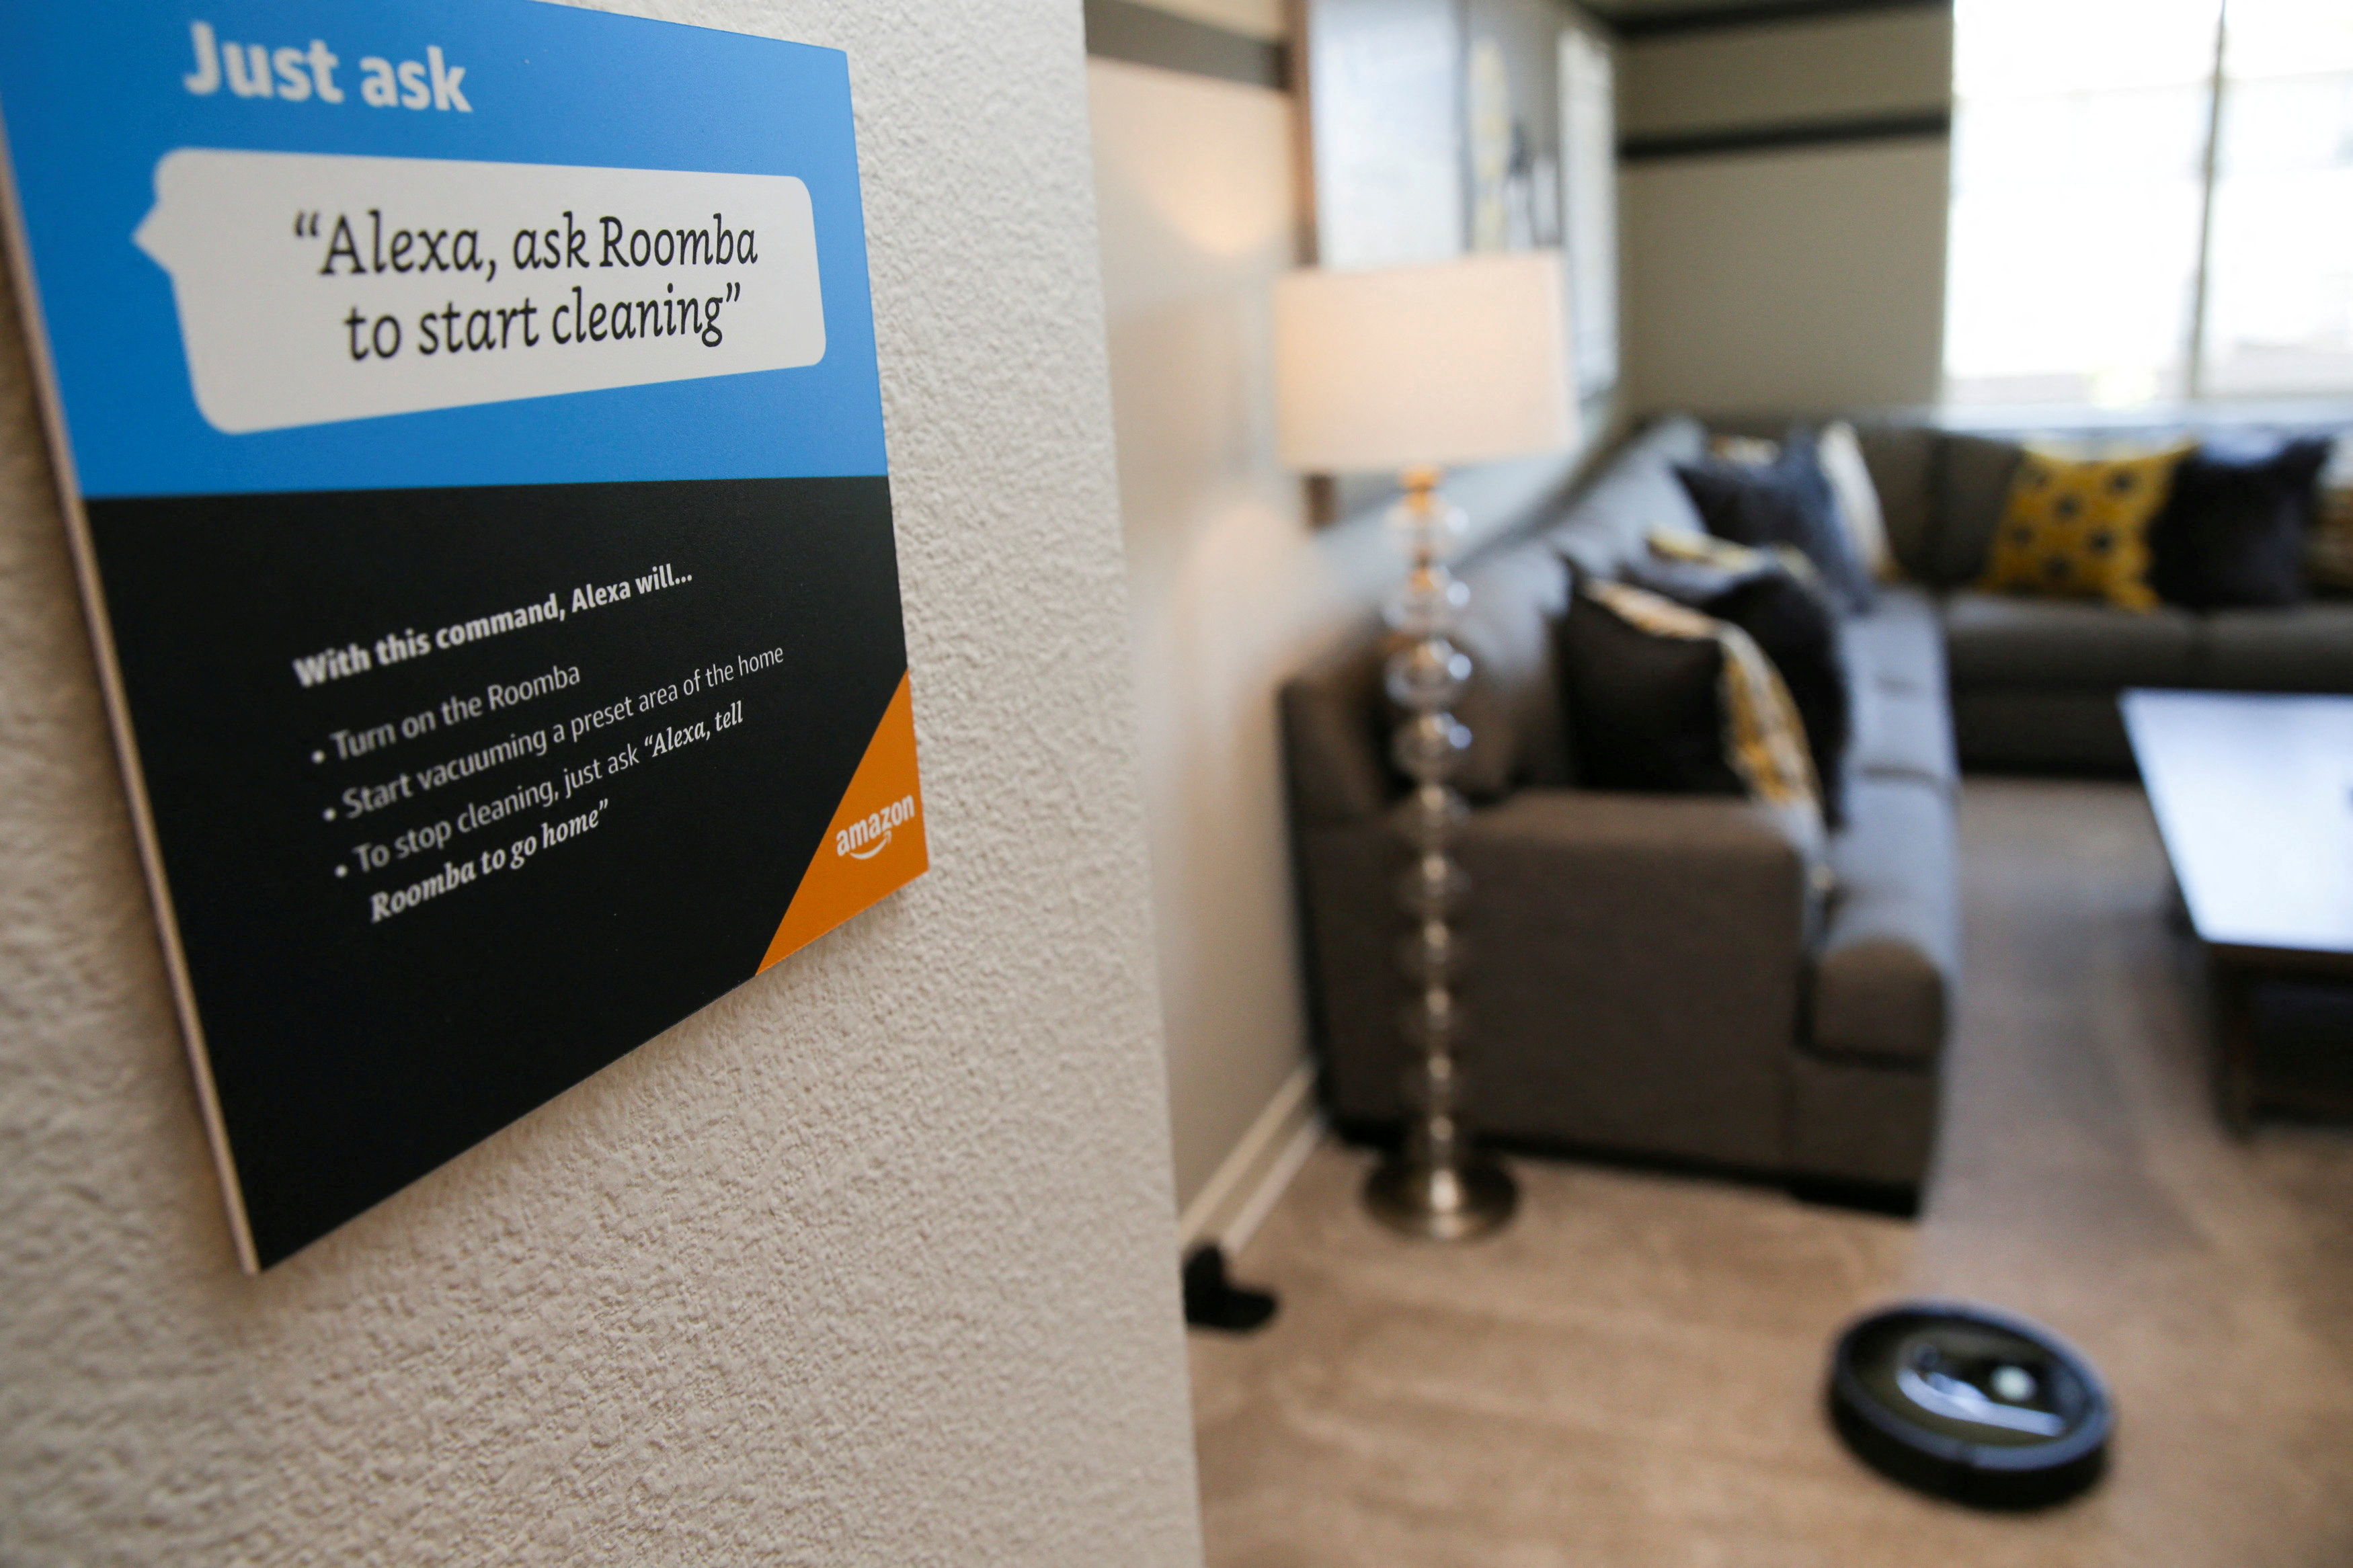 Prompts on how to use Amazon's Alexa personal assistant are seen as a wifi-equipped Roomba begins cleaning a room in an Amazon ‘experience center’  in Vallejo